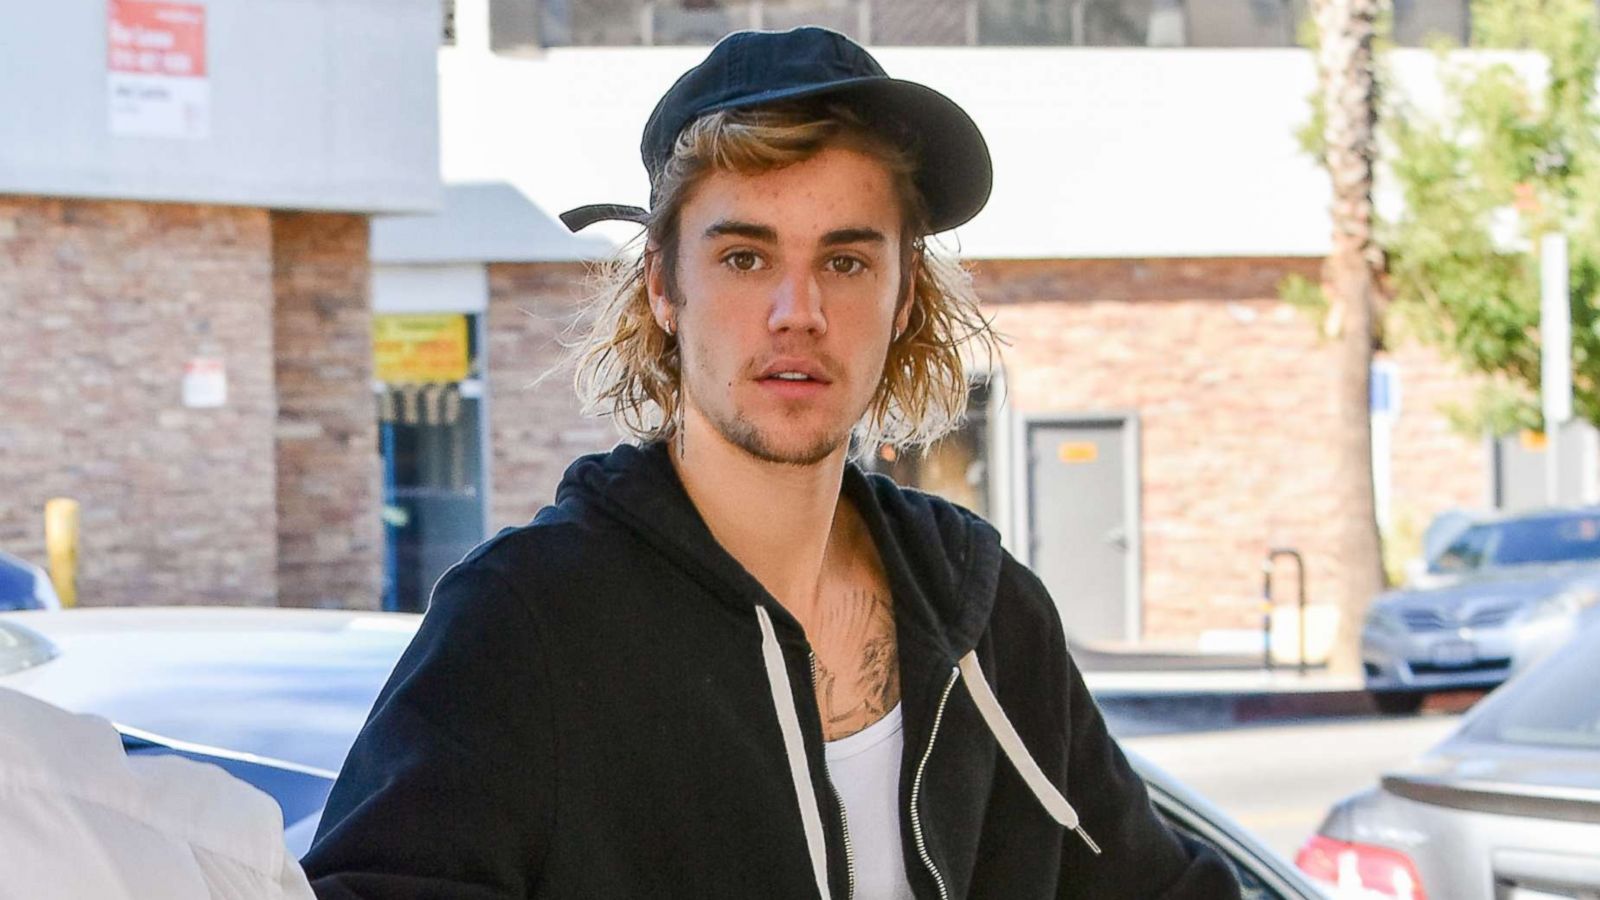 PHOTO: Justin Bieber is seen, Oct. 16, 2018, in Los Angeles.